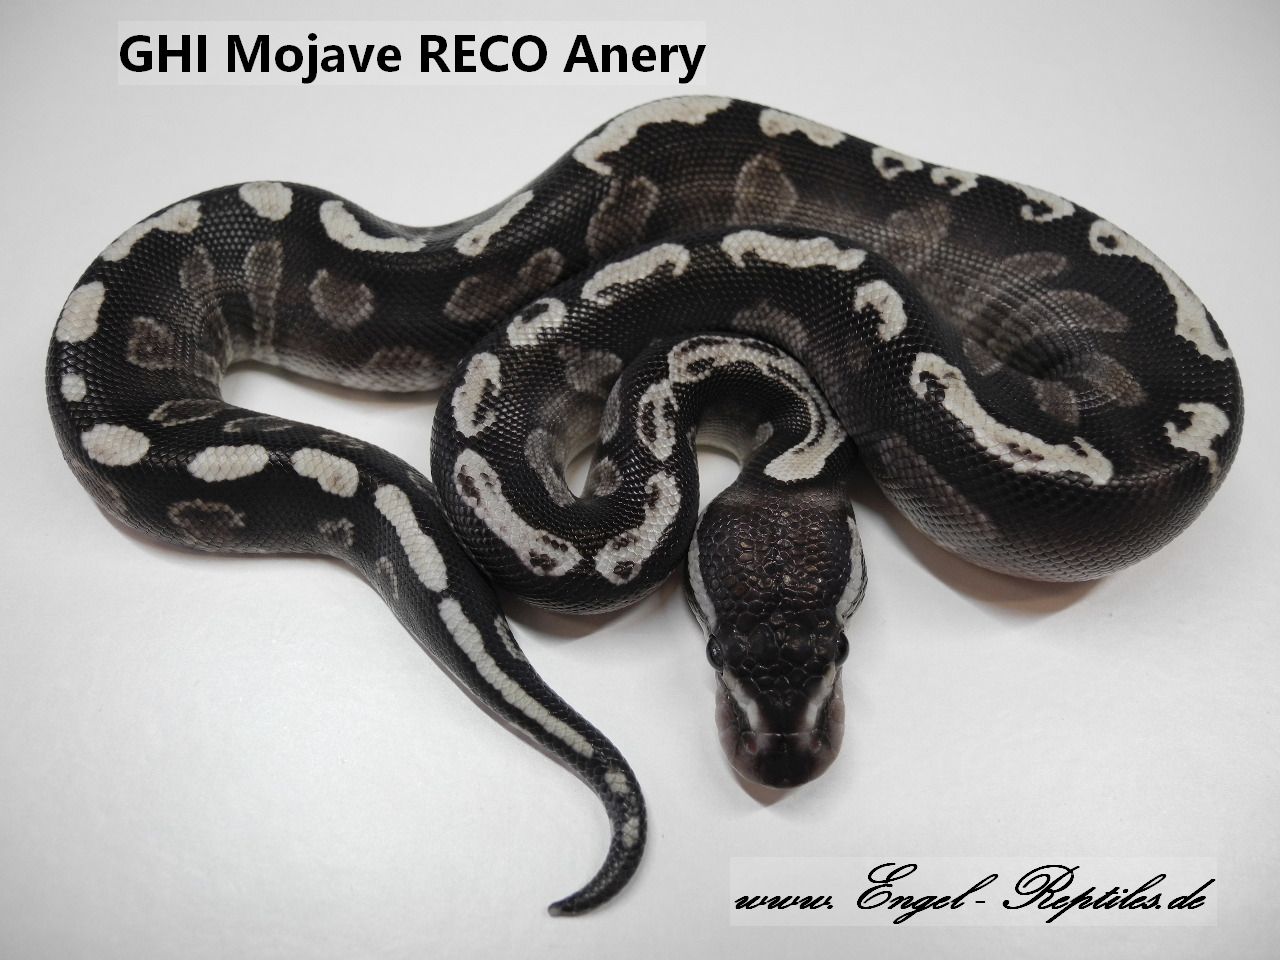 GHI Mojave RECO Anery by Engel Reptiles